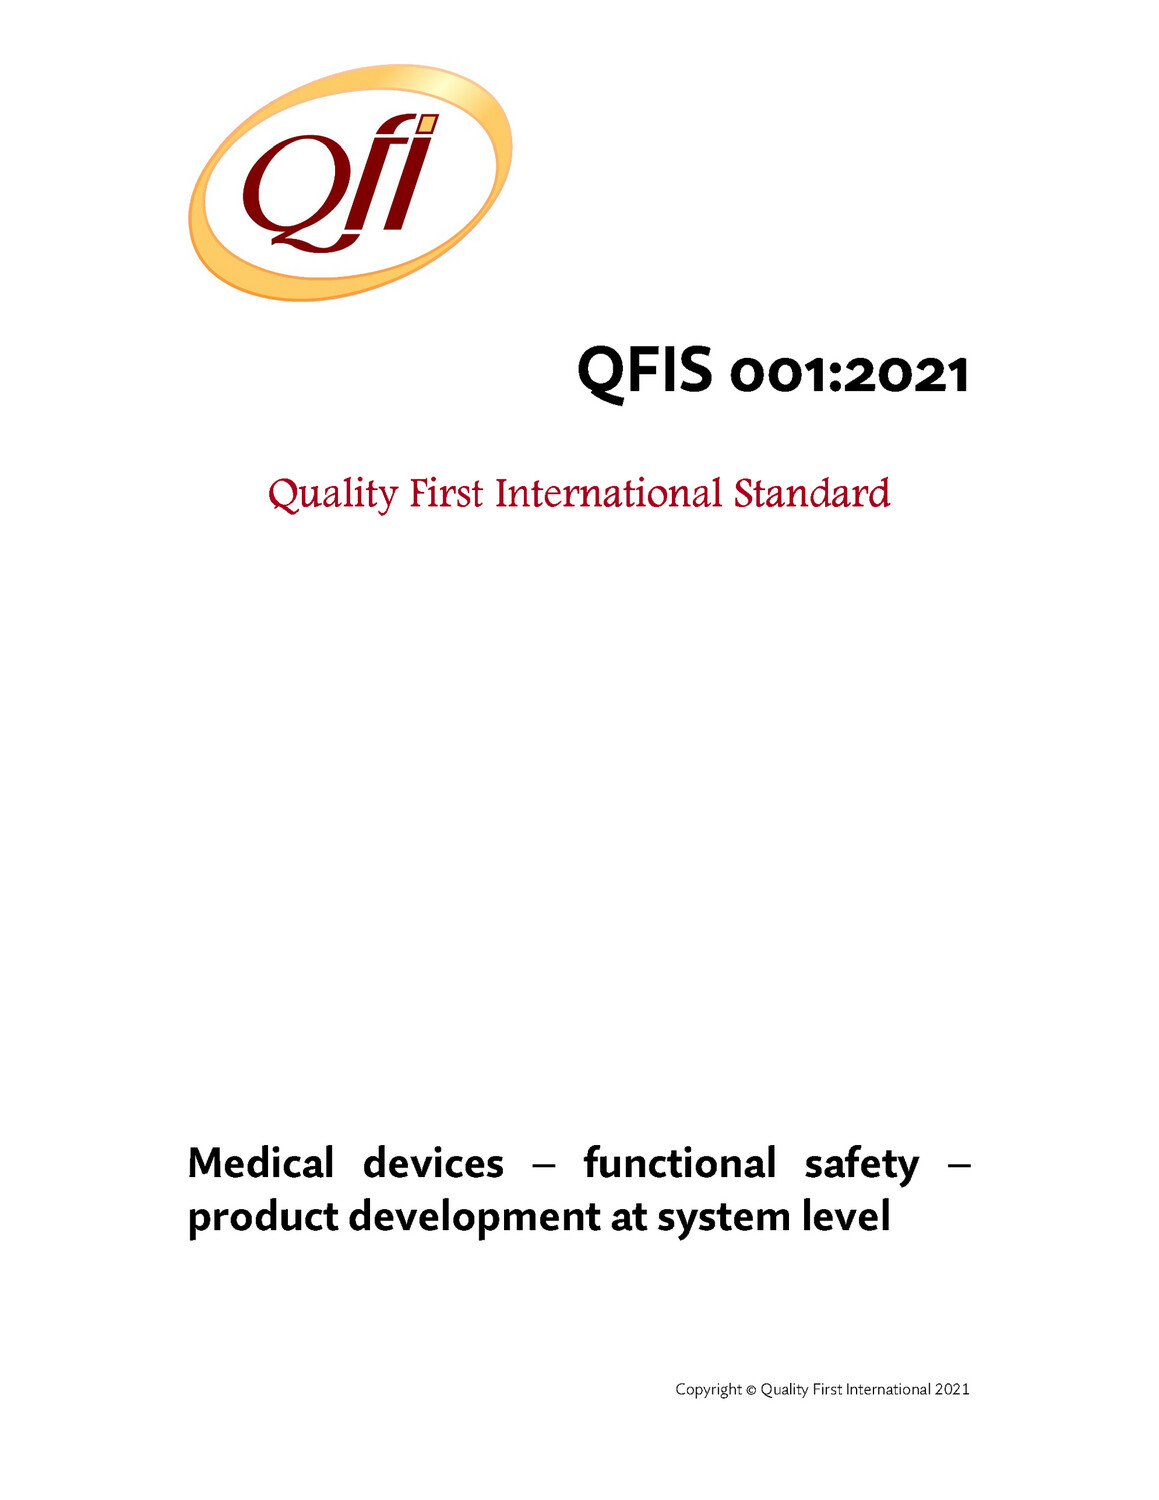 Medical Device Standard QFIS 001:2021 Medical devices – Functional safety – Product development at system level